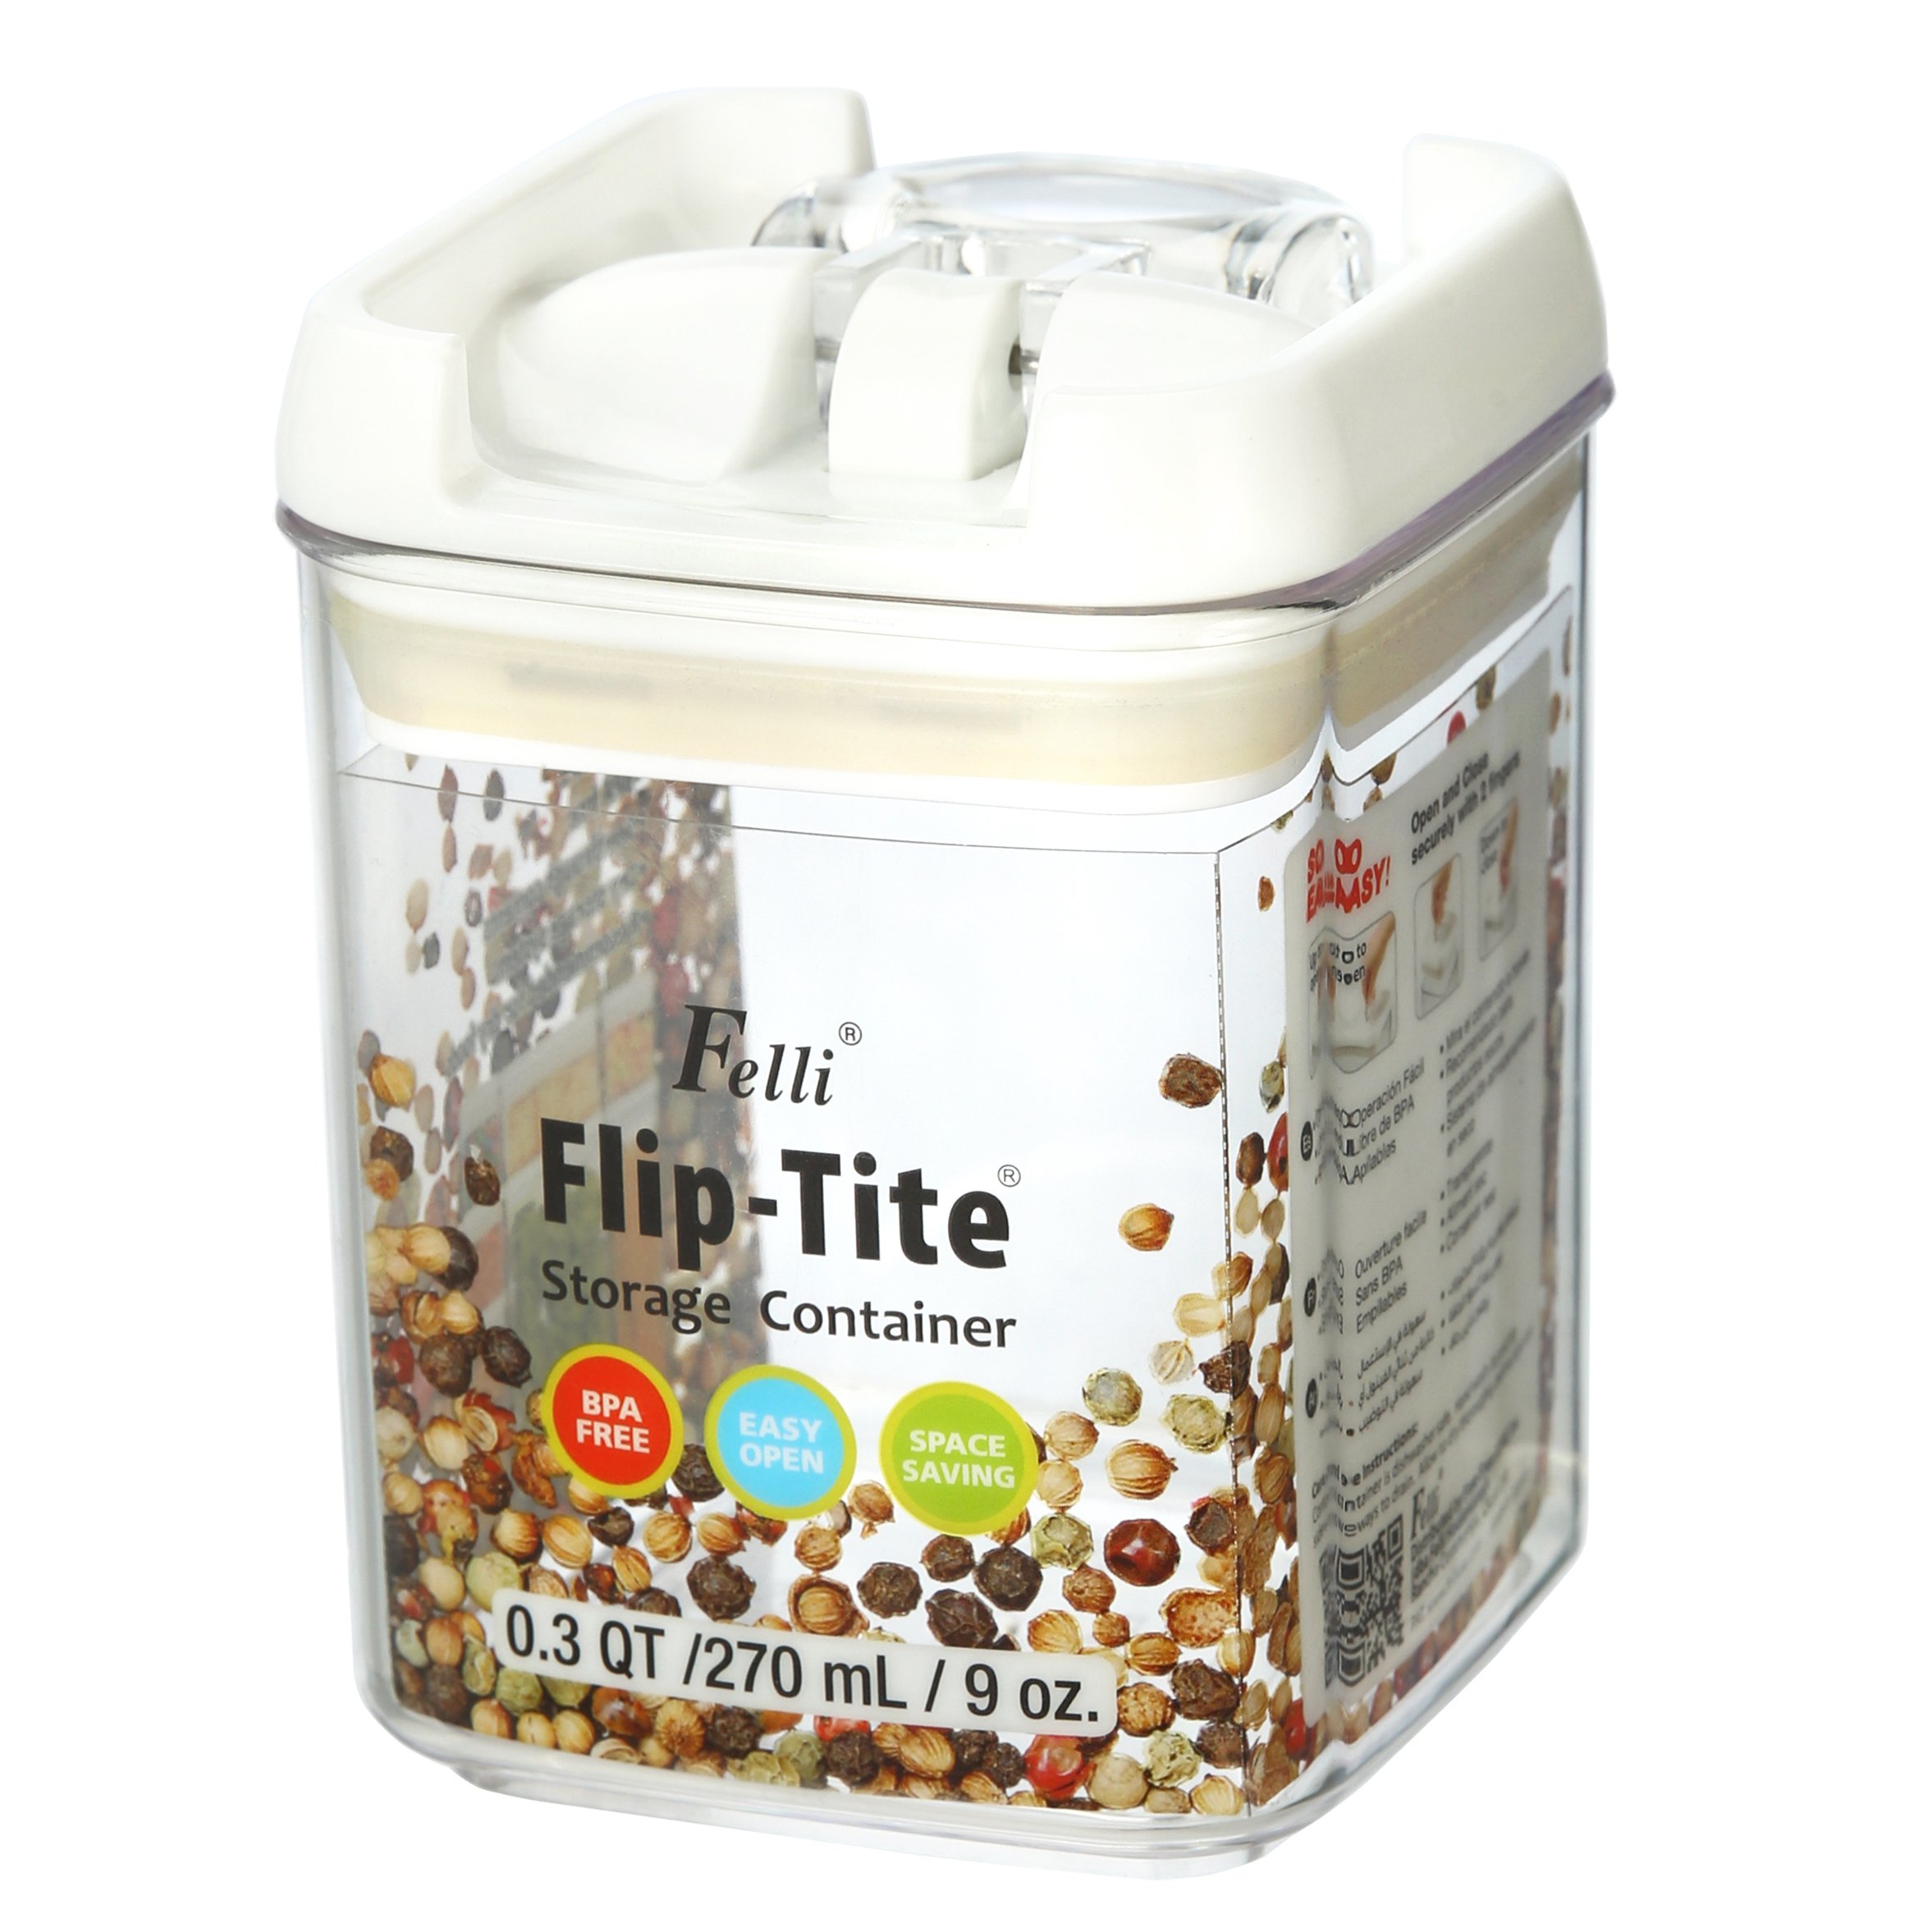  Felli Flip Tite Food Storage Container 5” LARGE Size